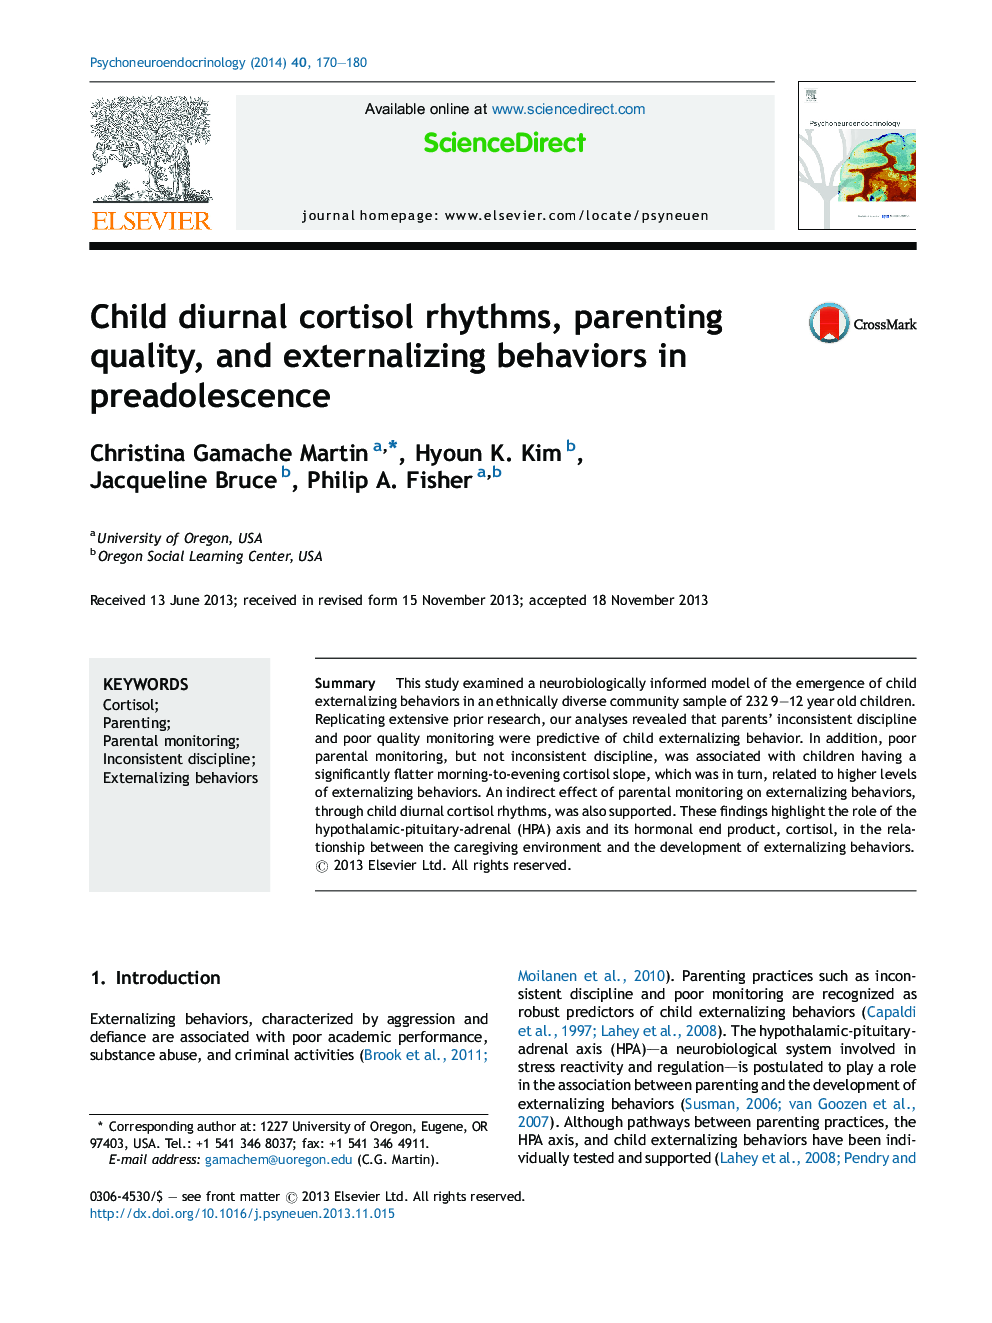 Child diurnal cortisol rhythms, parenting quality, and externalizing behaviors in preadolescence